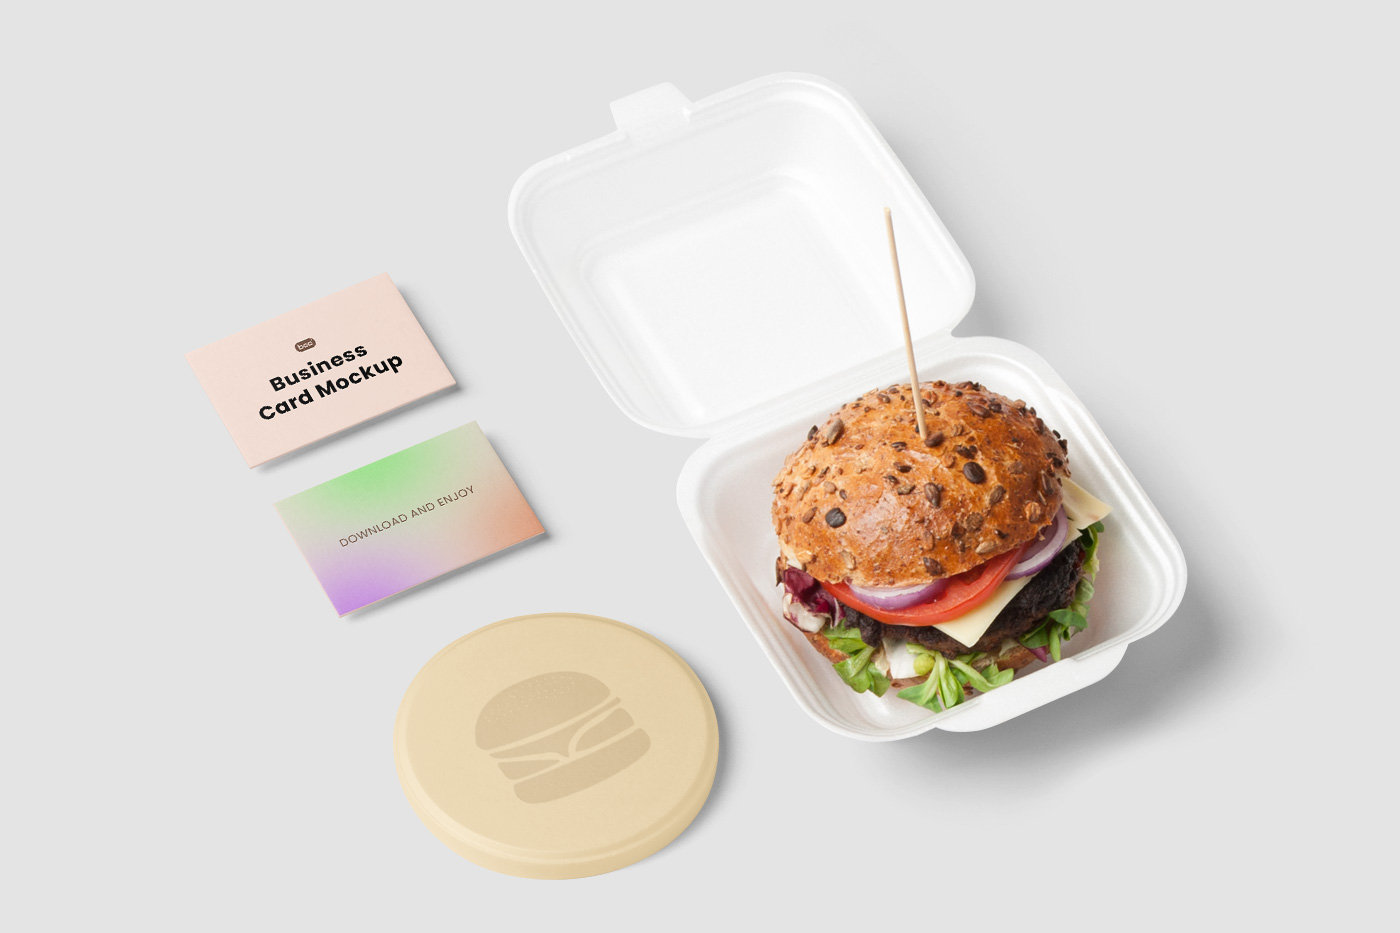 Perspective View of Business Cards and Coaster mockup